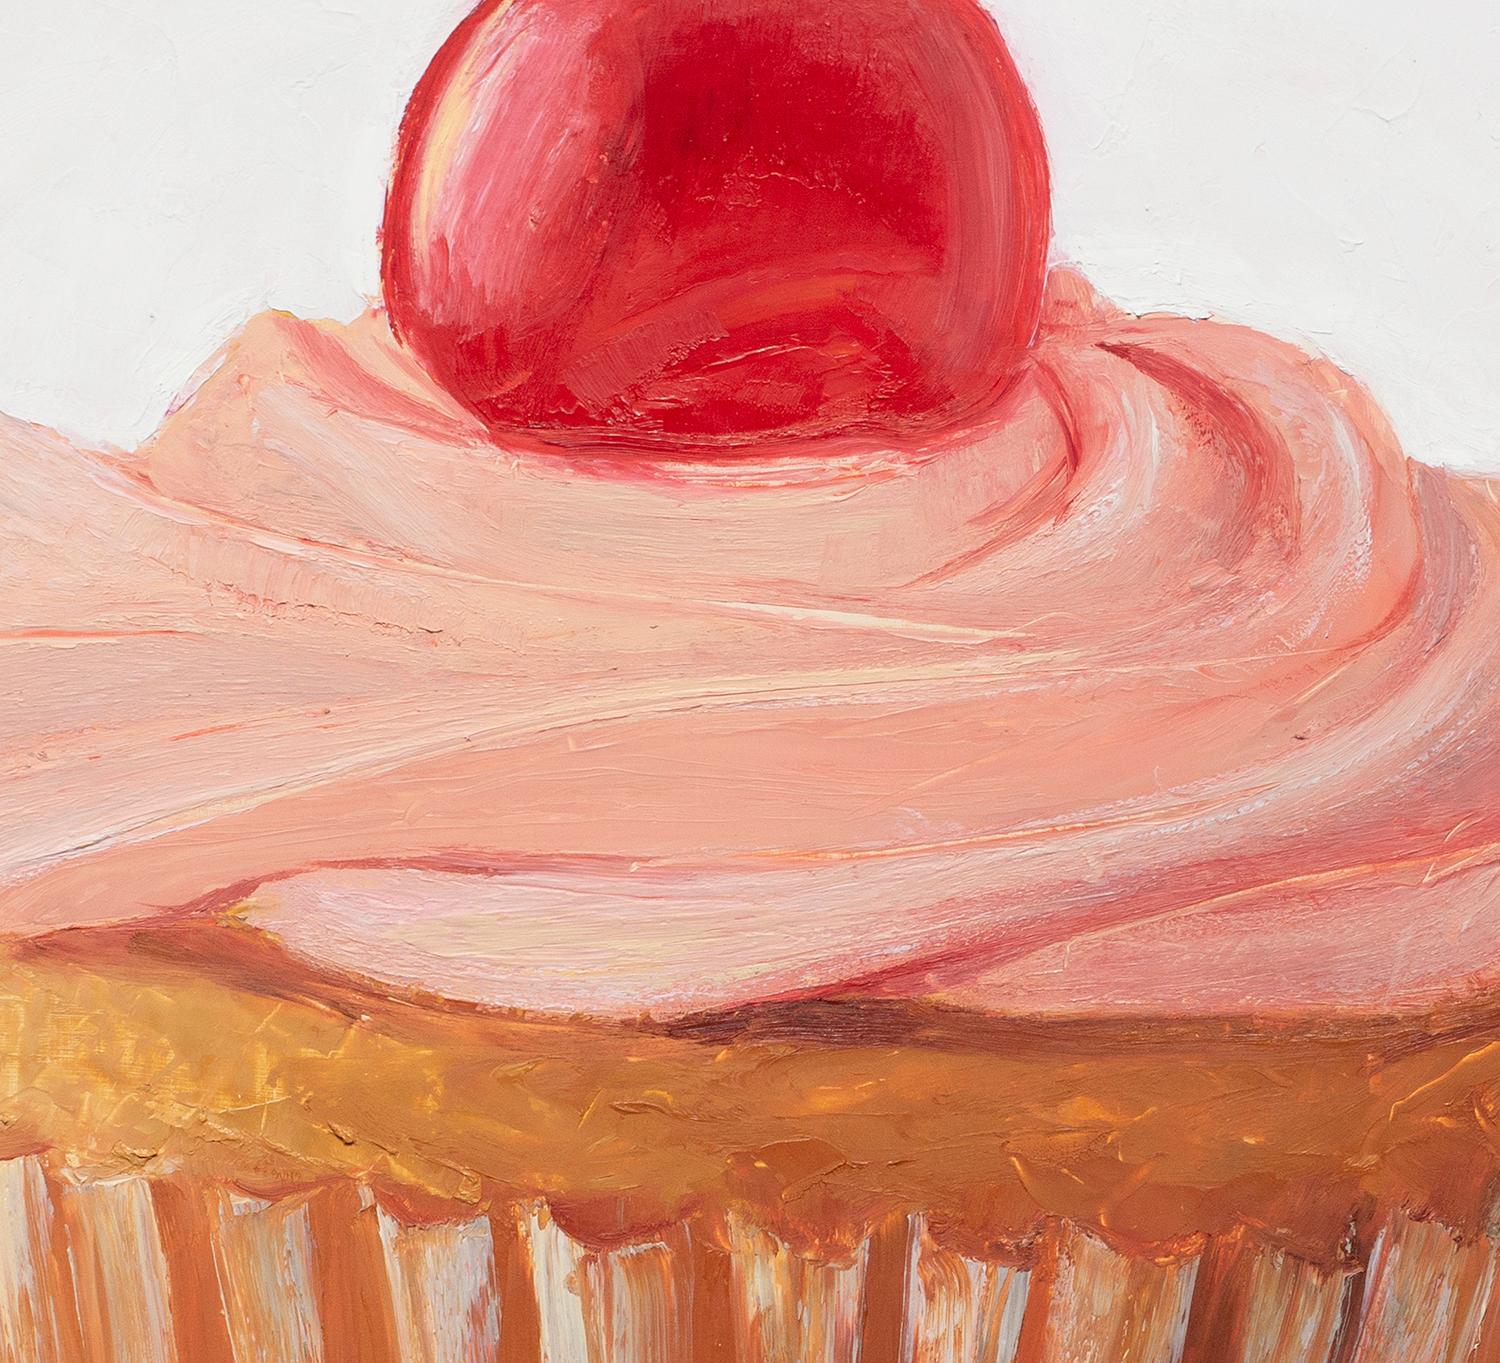 <p>Artist Comments<br>Artist McGarren Flack focuses on a single cherry cupcake on a solid white background. â€œWho doesn't like sweets?â€ asks McGarren. In his Sweets series, he draws every piece in a single sitting. Drew puts sole focus on the